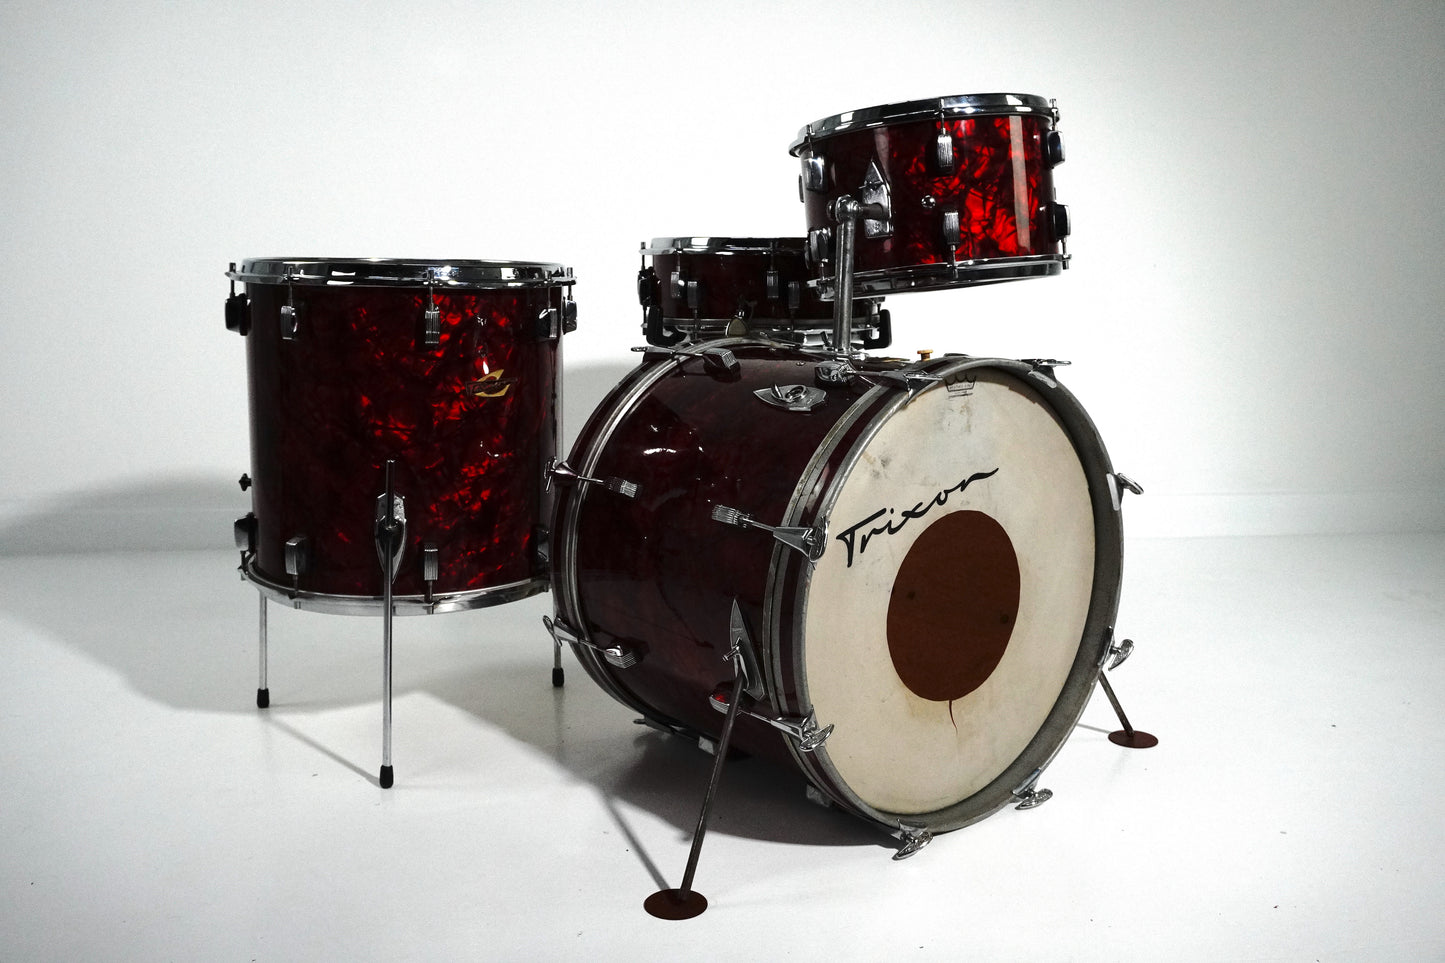 Trixon 4-Piece Luxus in Red Pearl 20,13,16,14